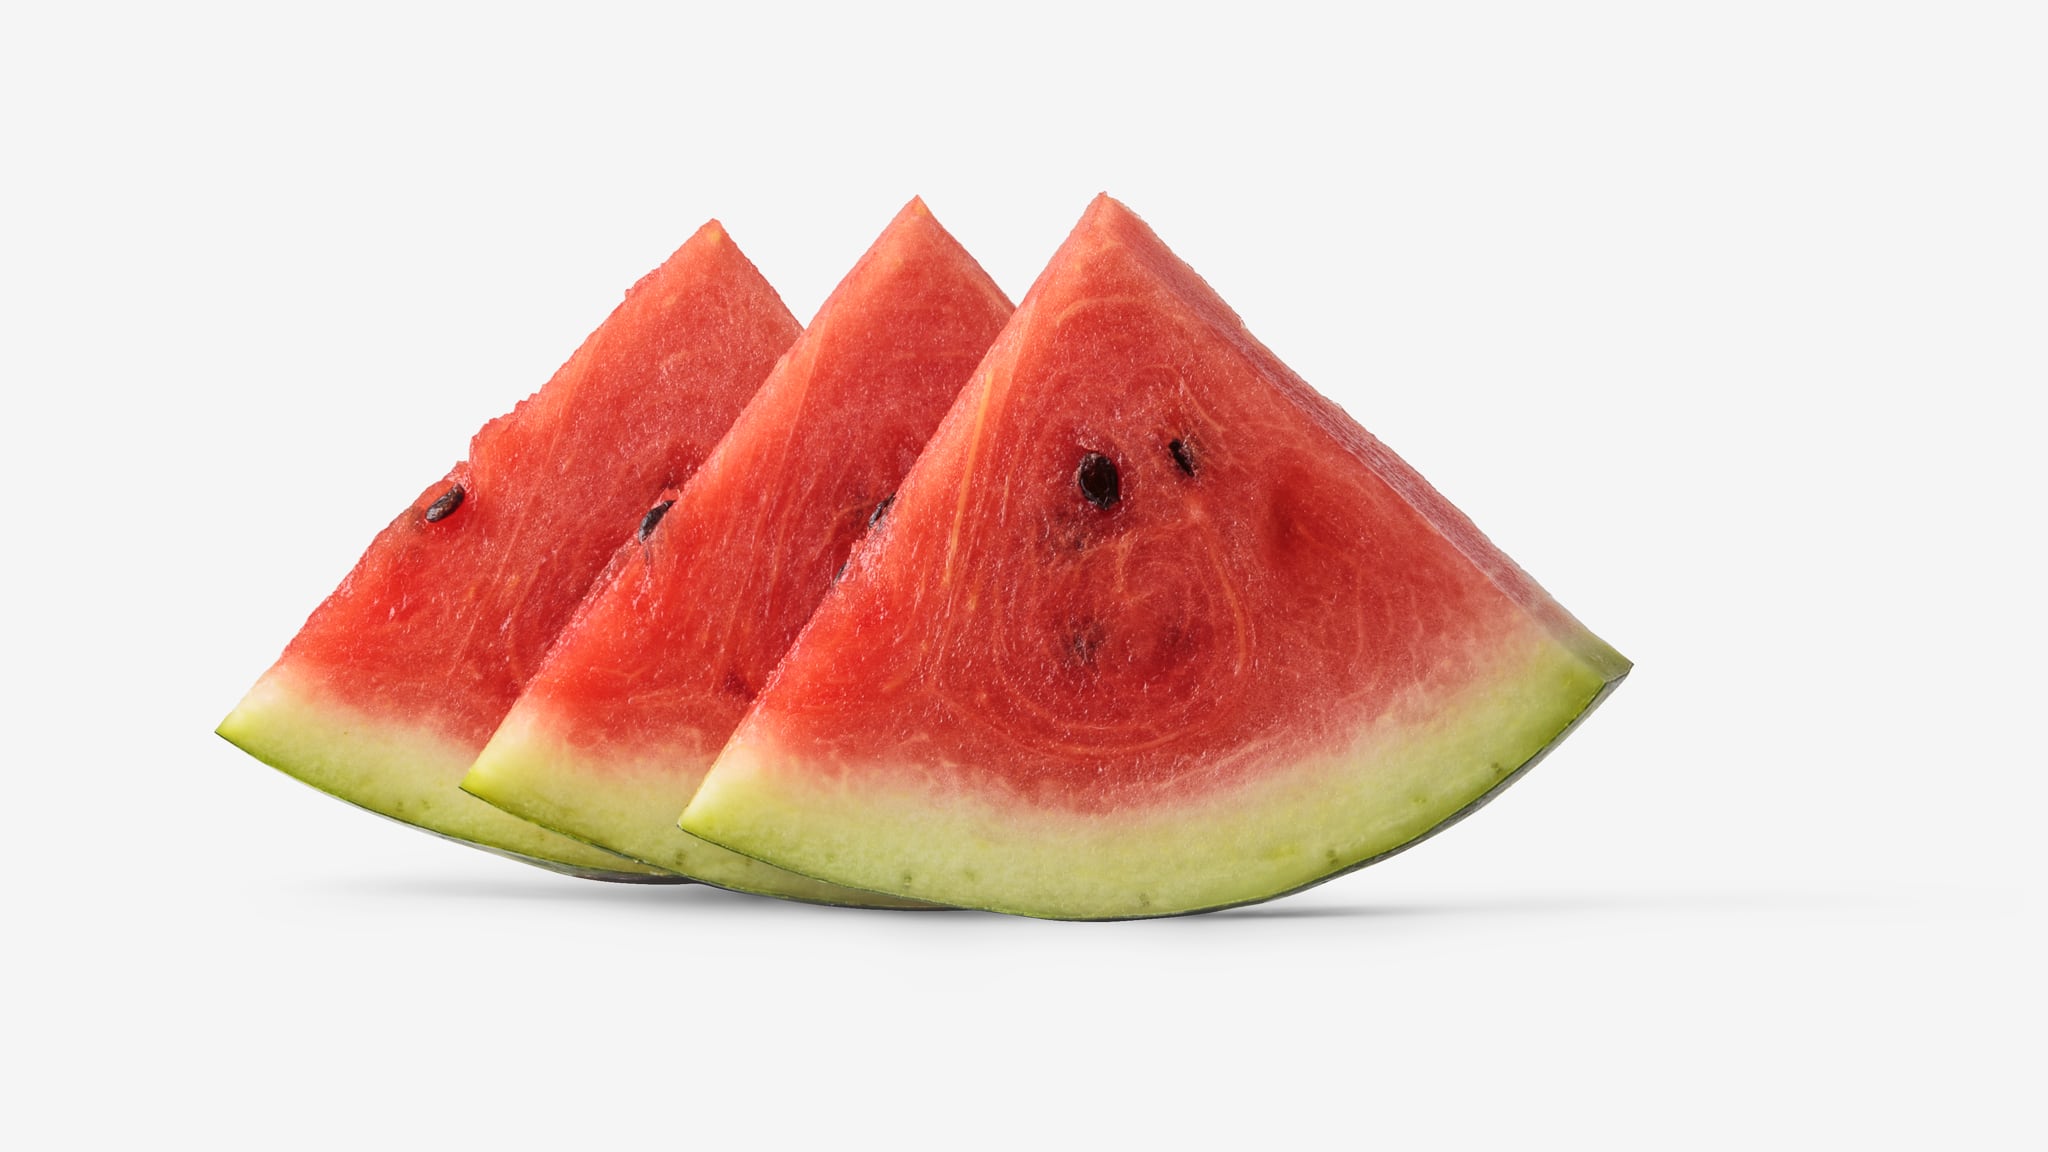 Watermelon image asset with transparent background